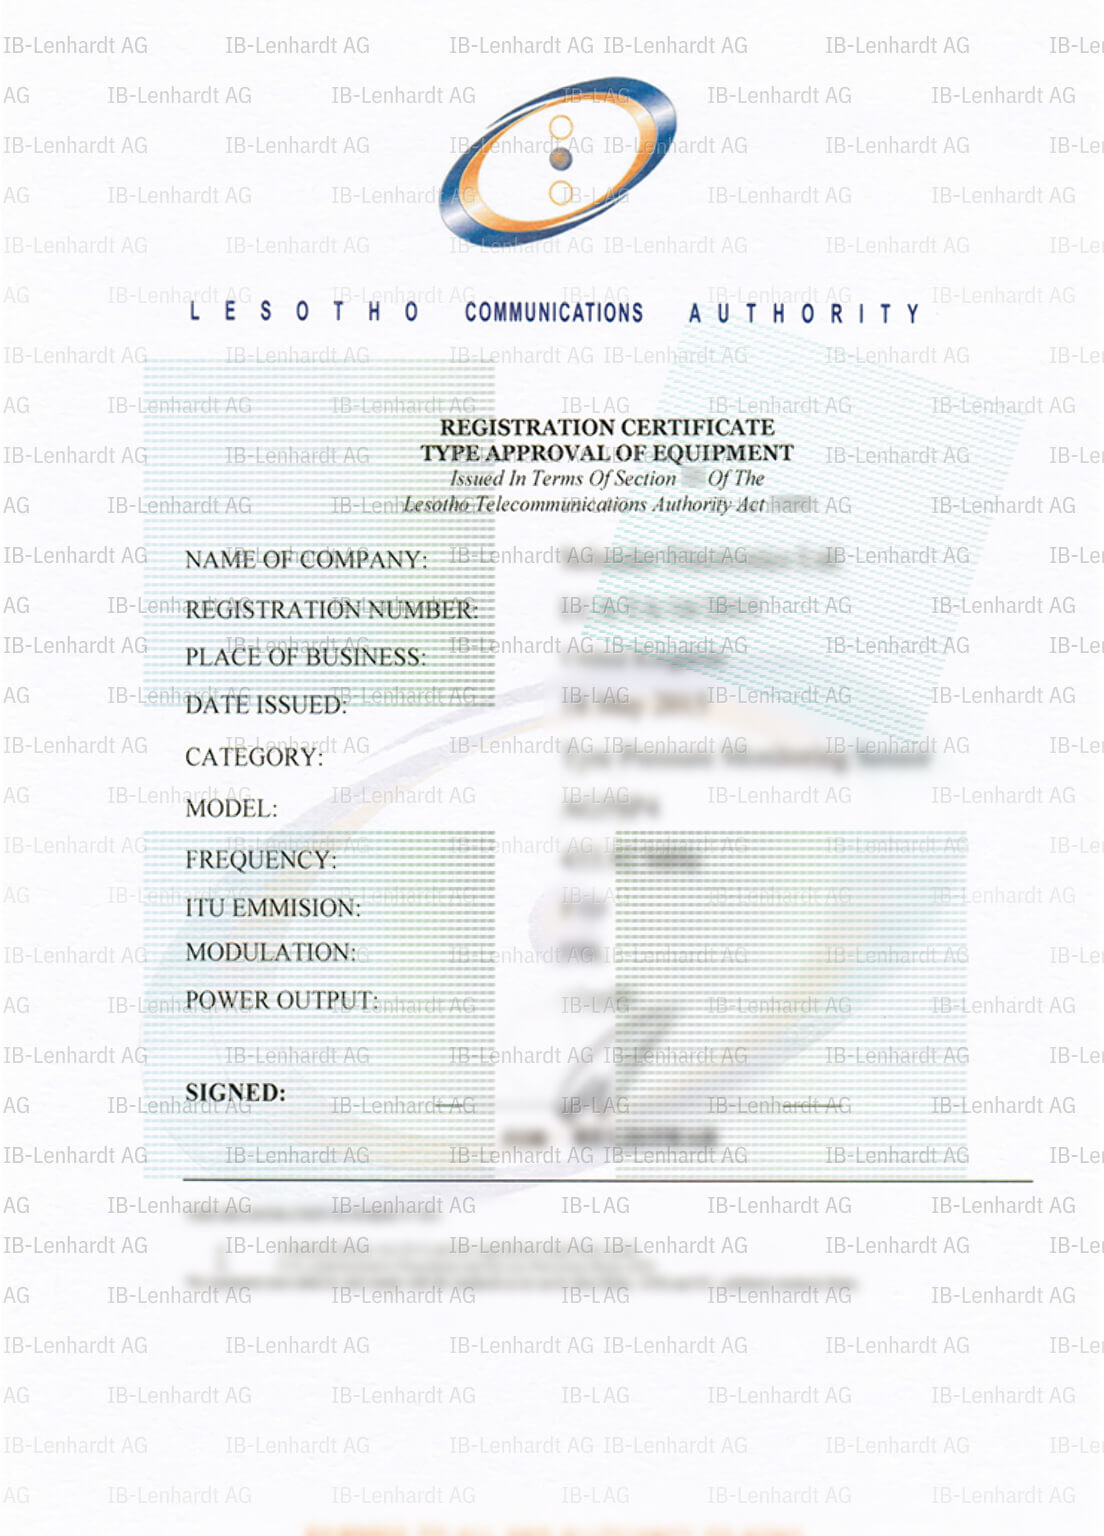 Certificate example Lesotho